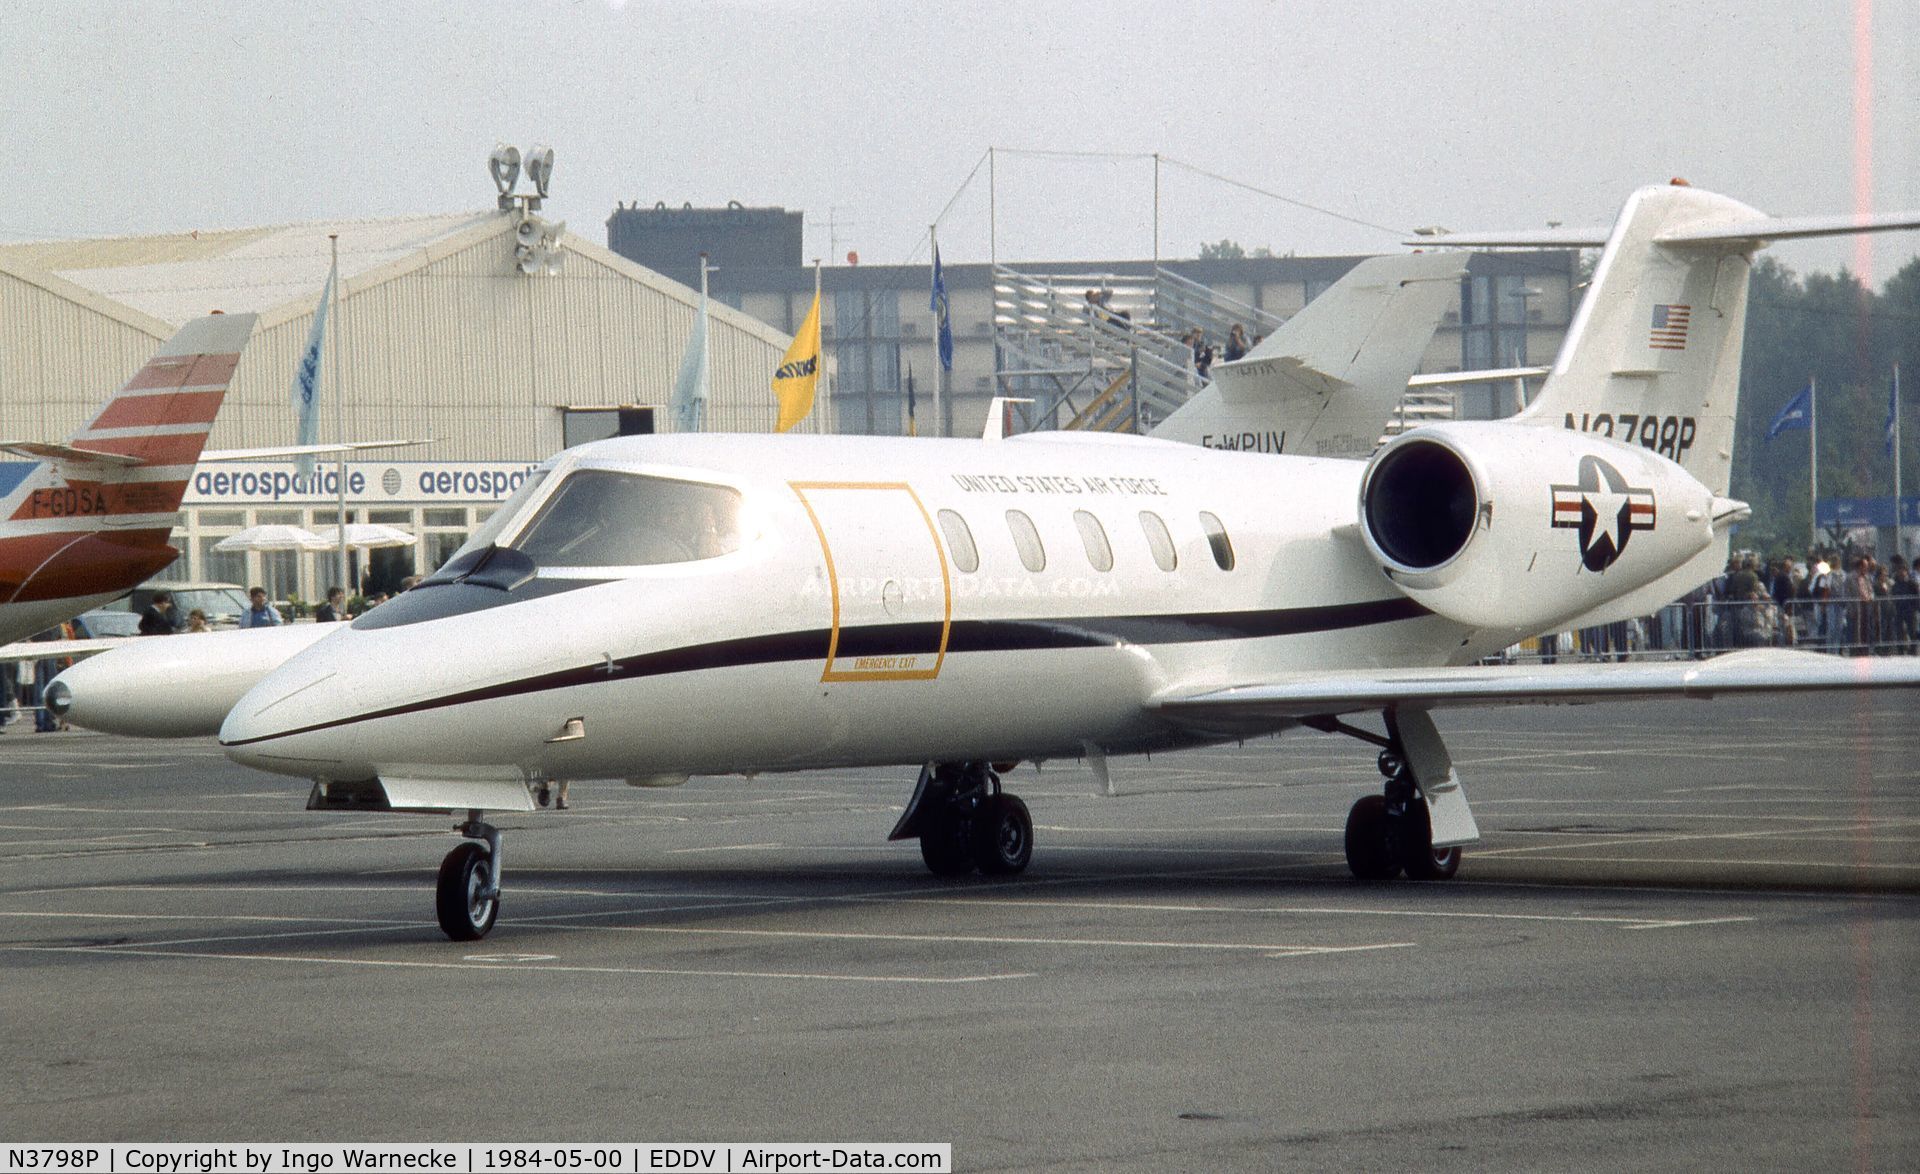 N3798P, 1983 Learjet 35A C/N 35A-408, Gates Learjet 35A (C-21A) of the USAF at the ILA 1984, Hannover